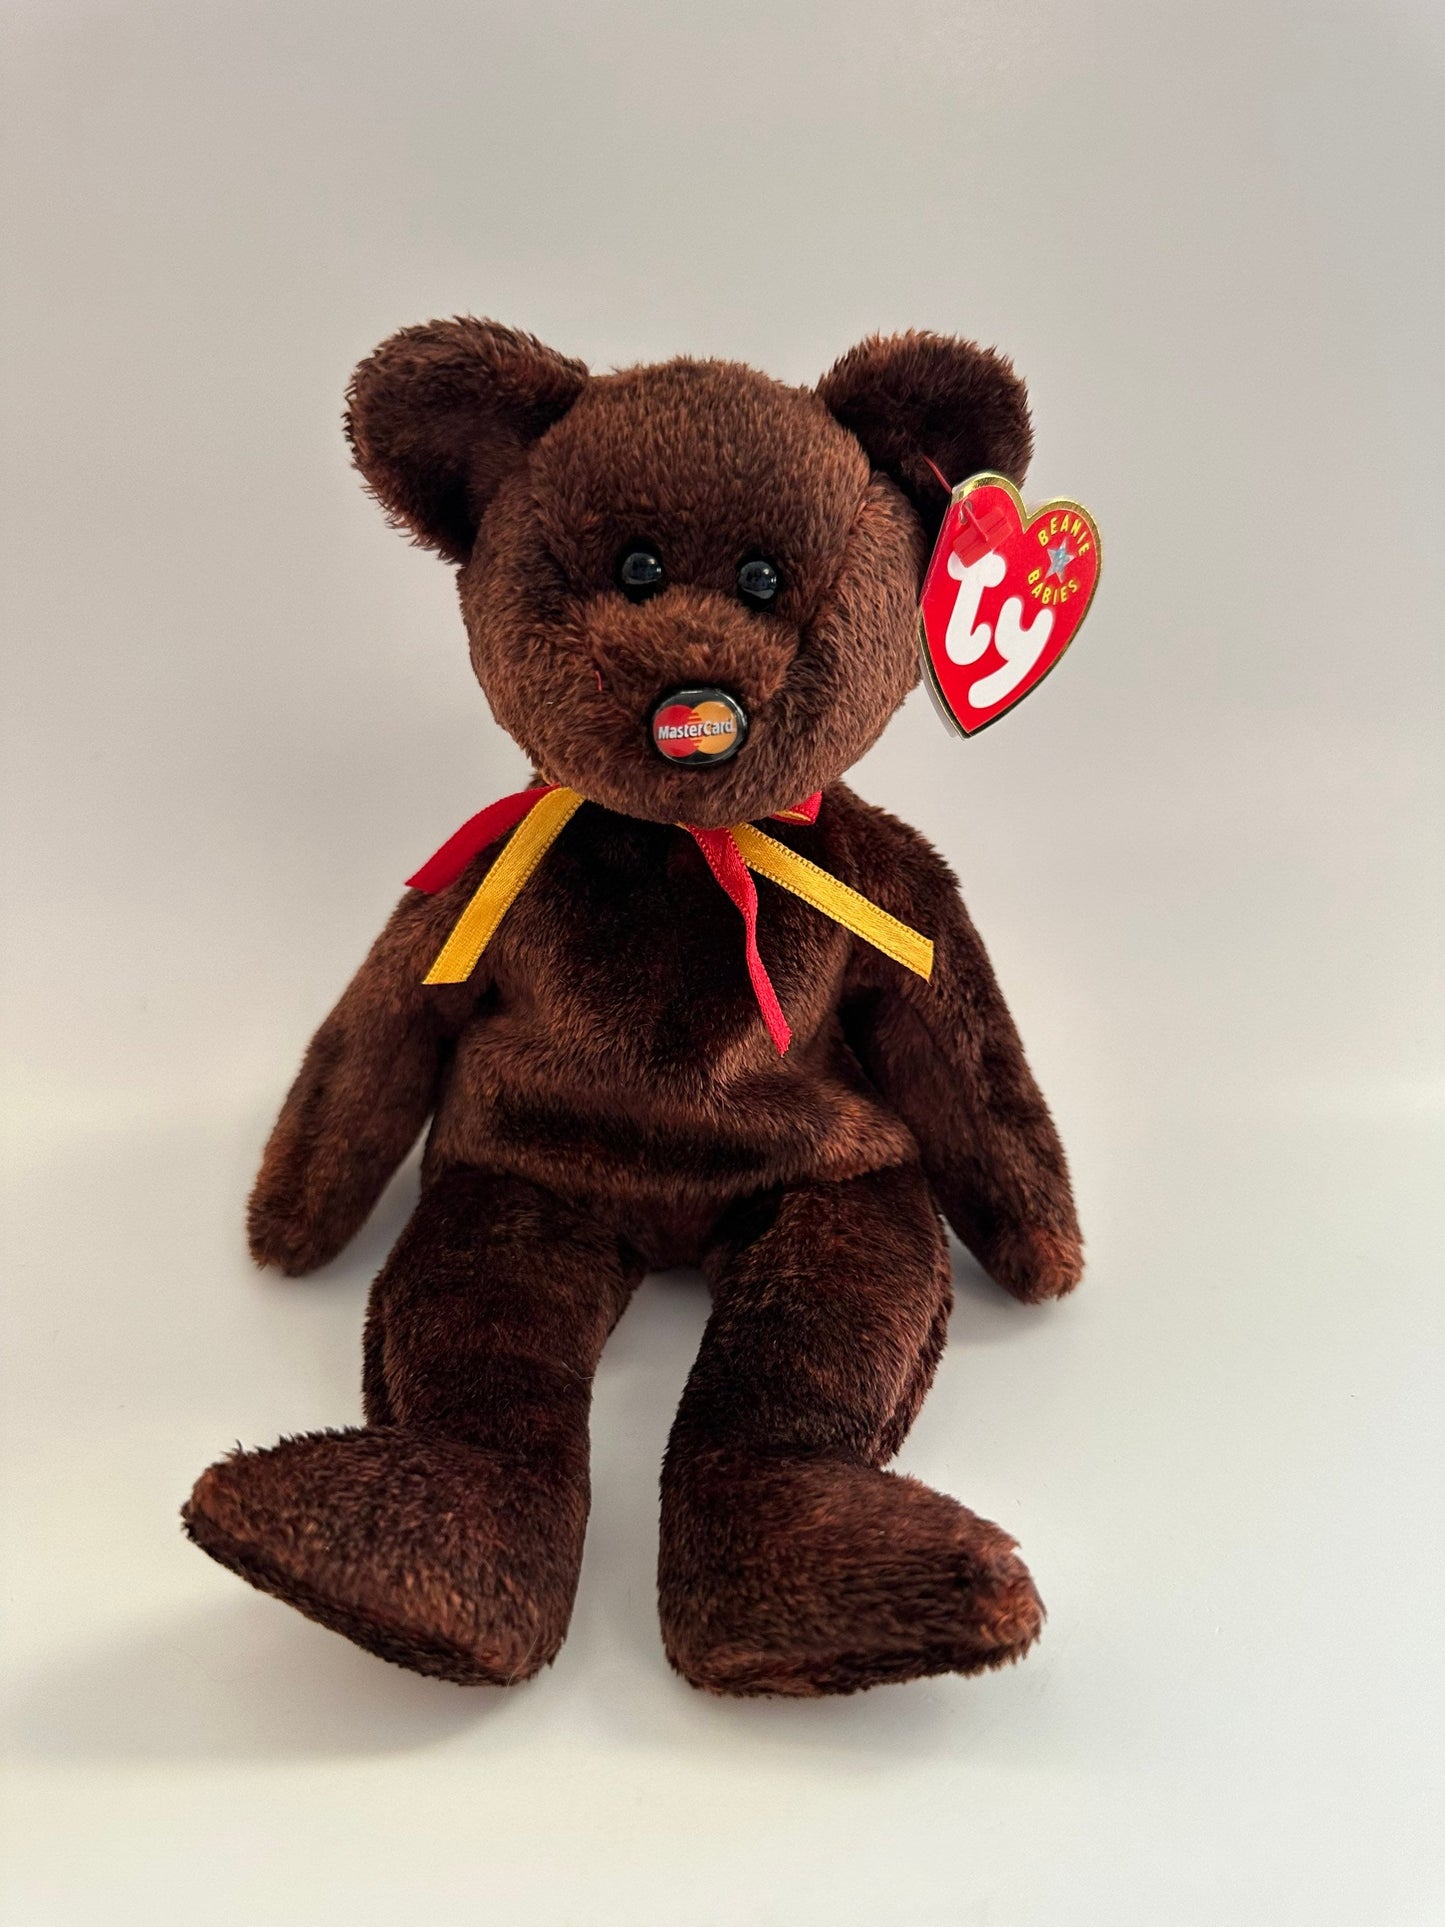 Ty Beanie Baby “M.C. Beanie” the MasterCard Bear- Credit Card Exclusive (8.5 inch)